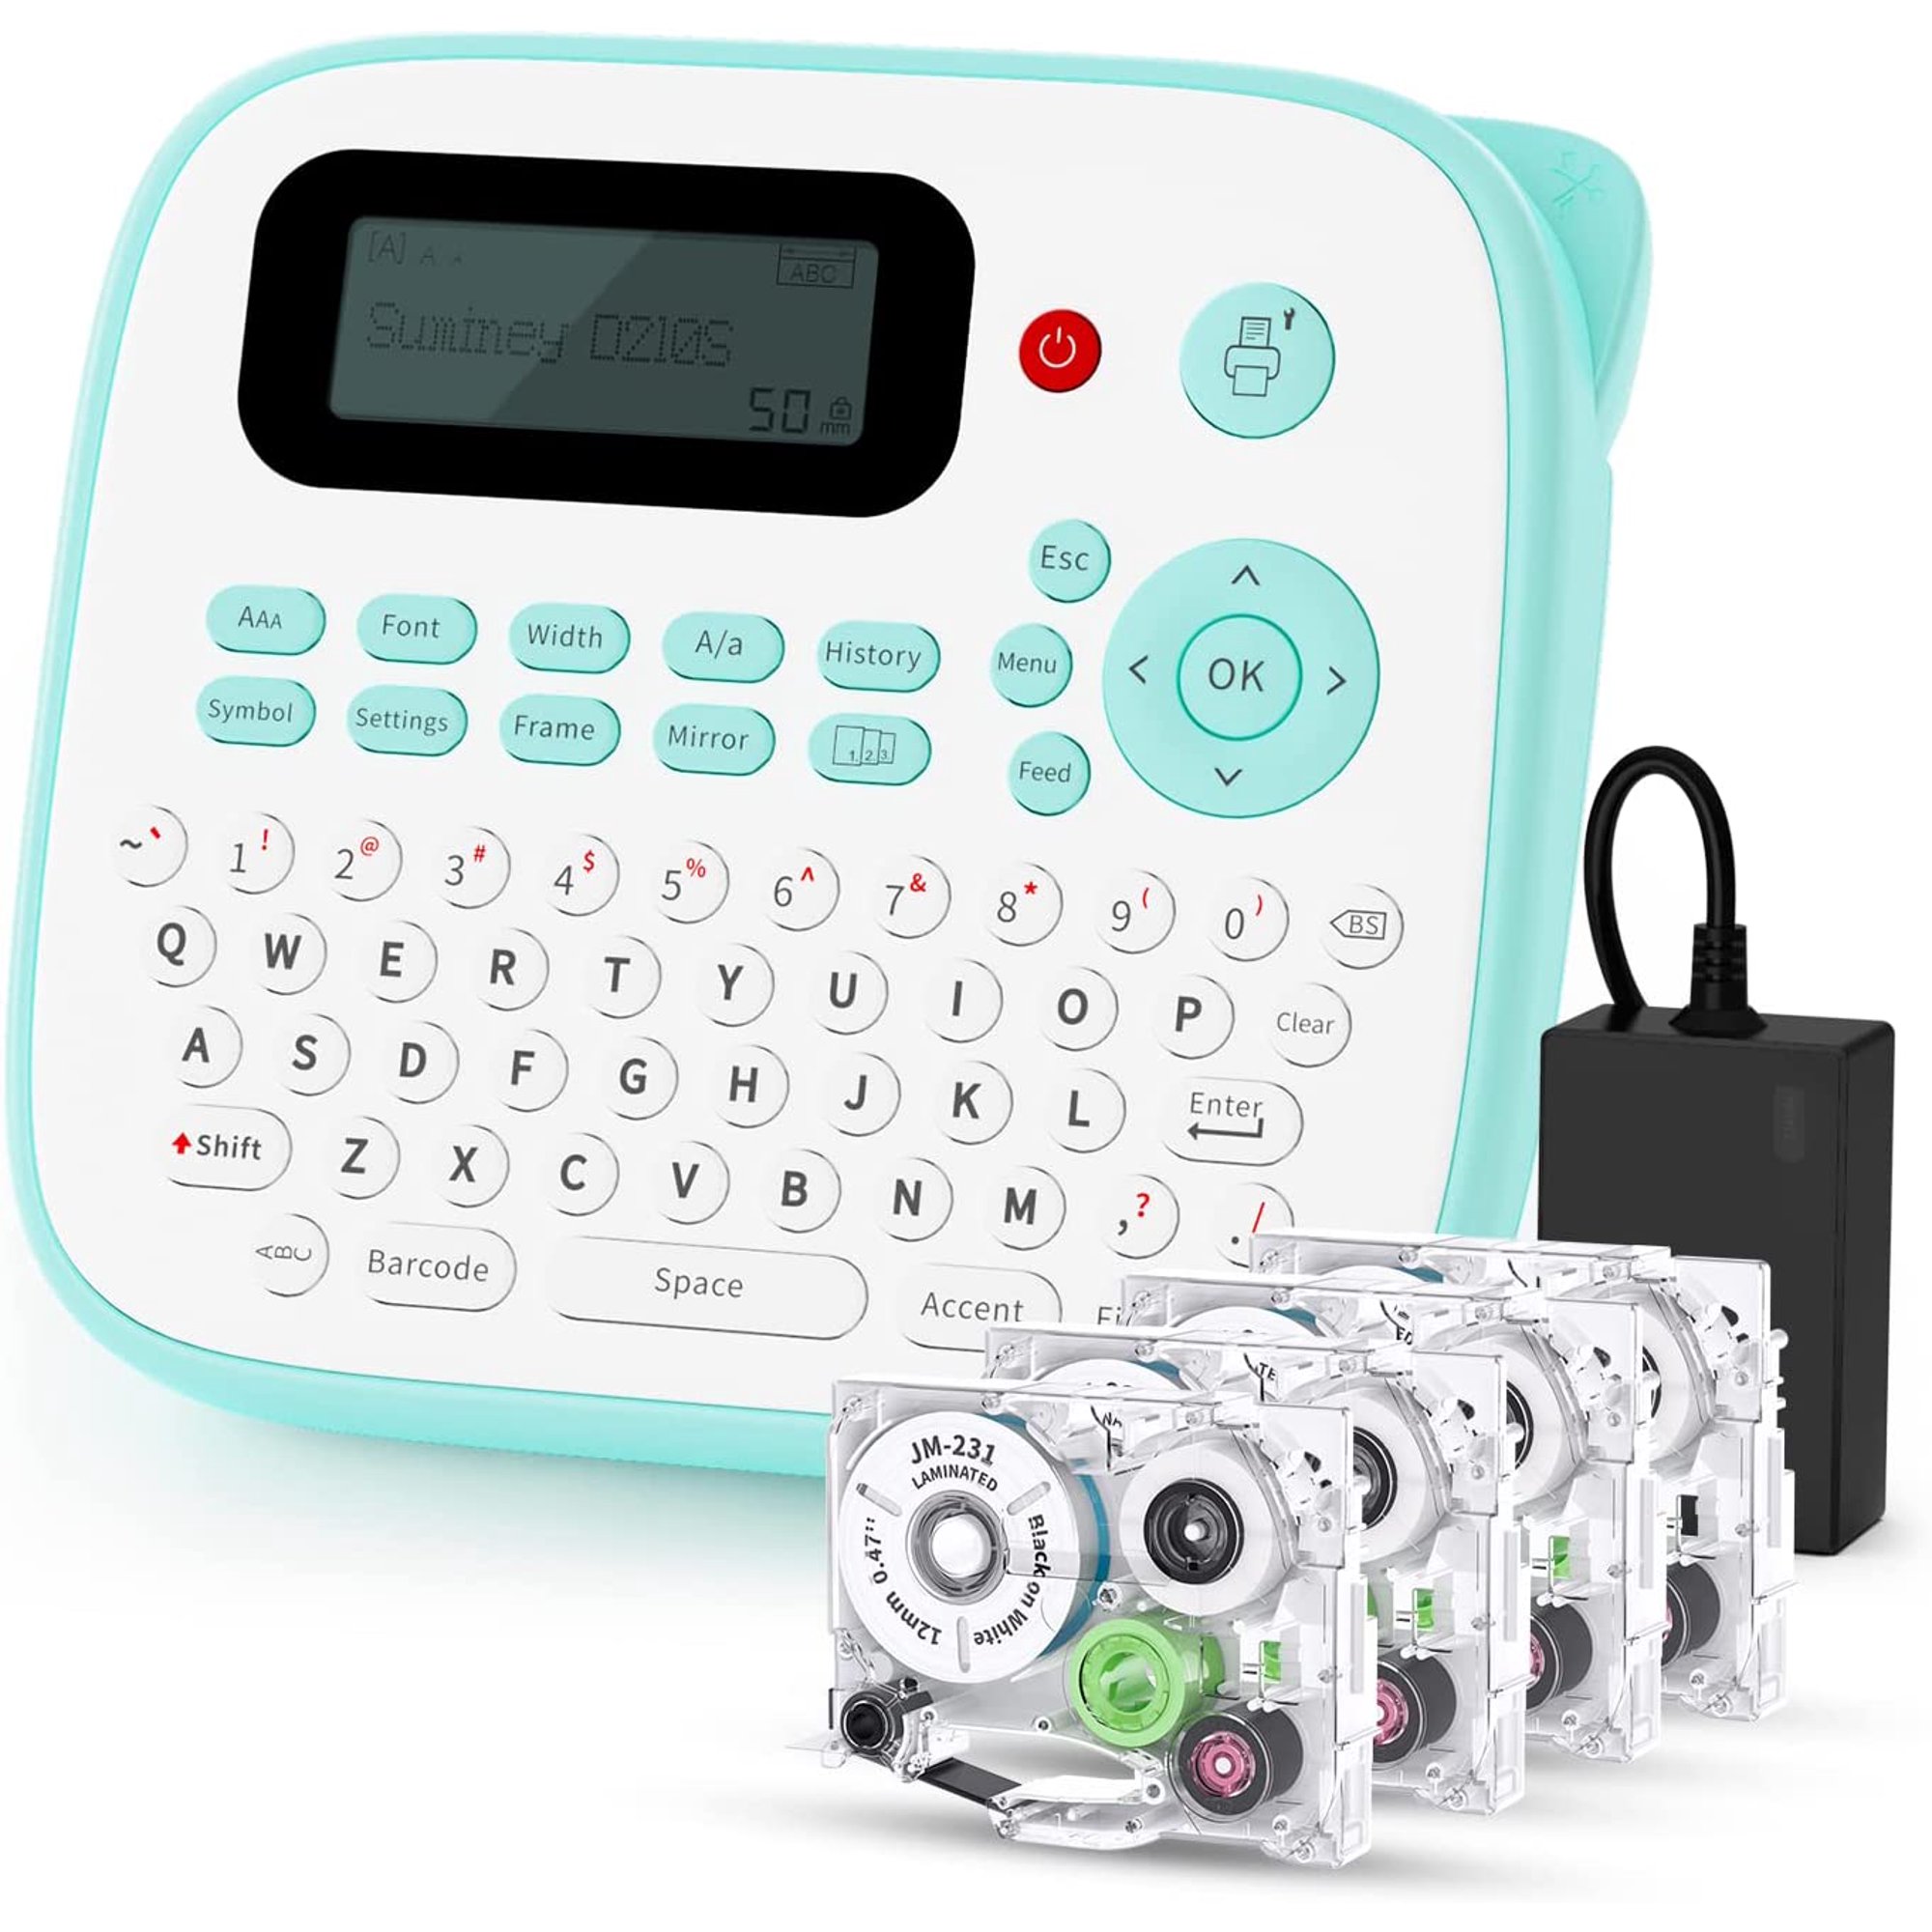 Portable Label Maker Machine with Tape D210S Handheld Labeler Label Printer for Labeling with 4 Laminated Label Makers Tapes JM231, Green